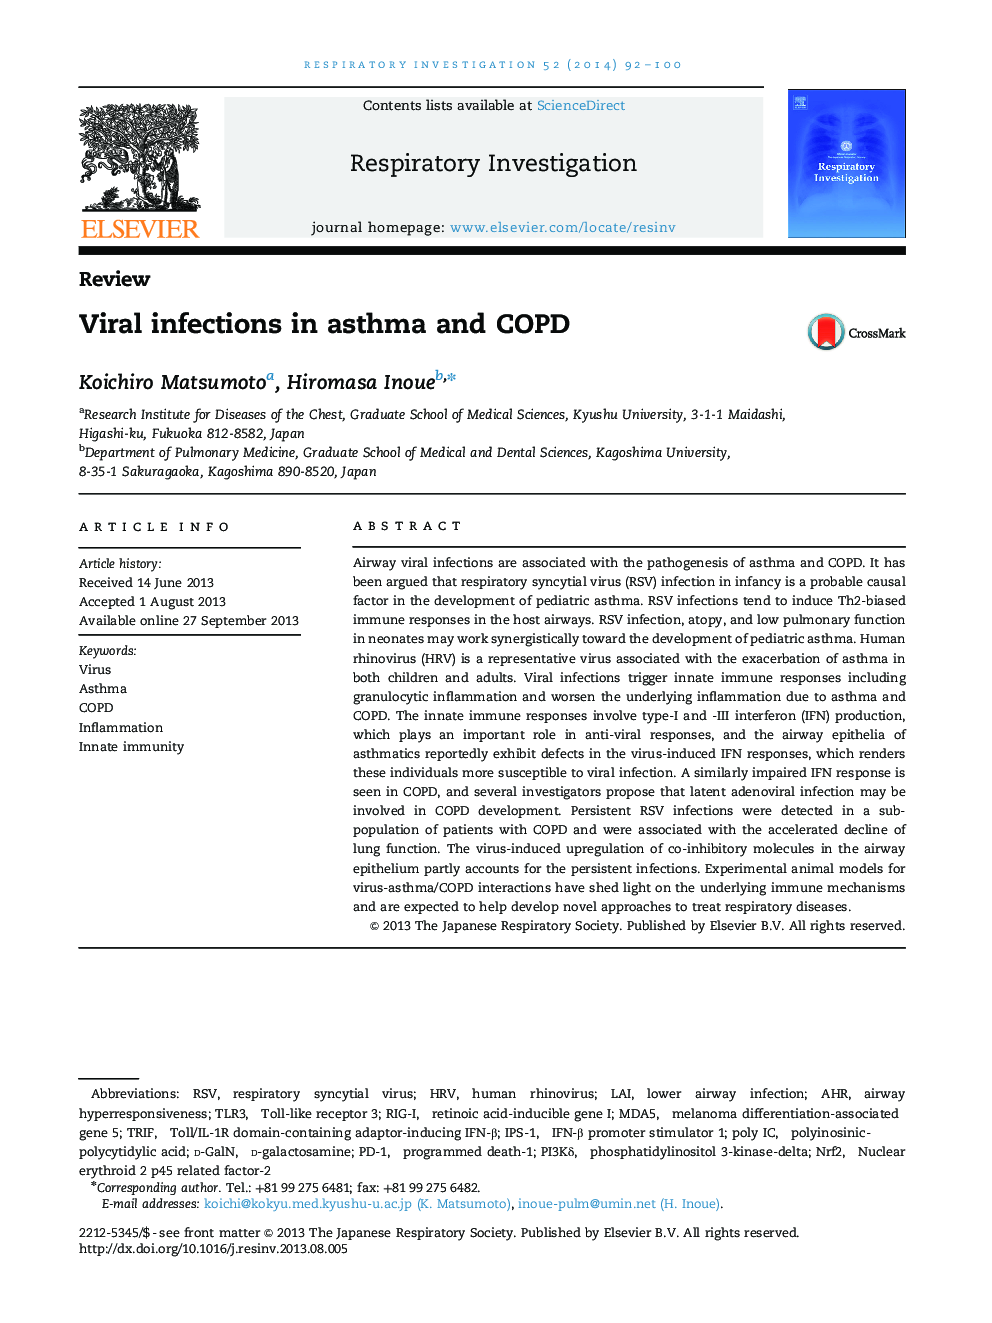 Viral infections in asthma and COPD